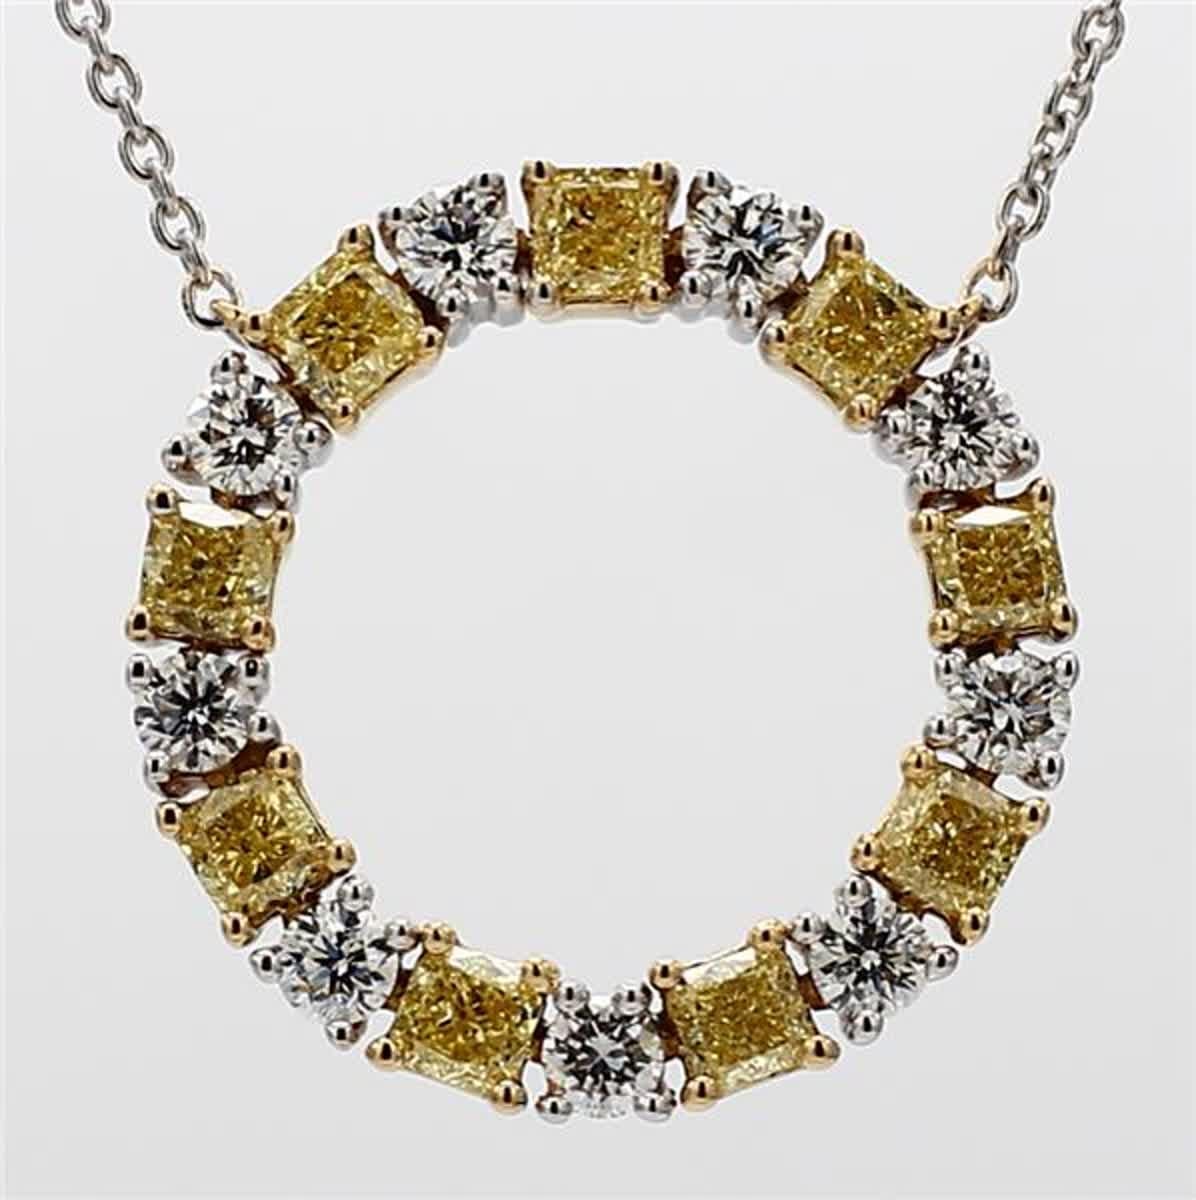 RareGemWorld's intriguing diamond necklace. Mounted in a beautiful 18K Yellow and White Gold setting with natural radiant cut yellow diamonds. The yellow diamonds are complimented by small round natural white diamond melee. This necklace is